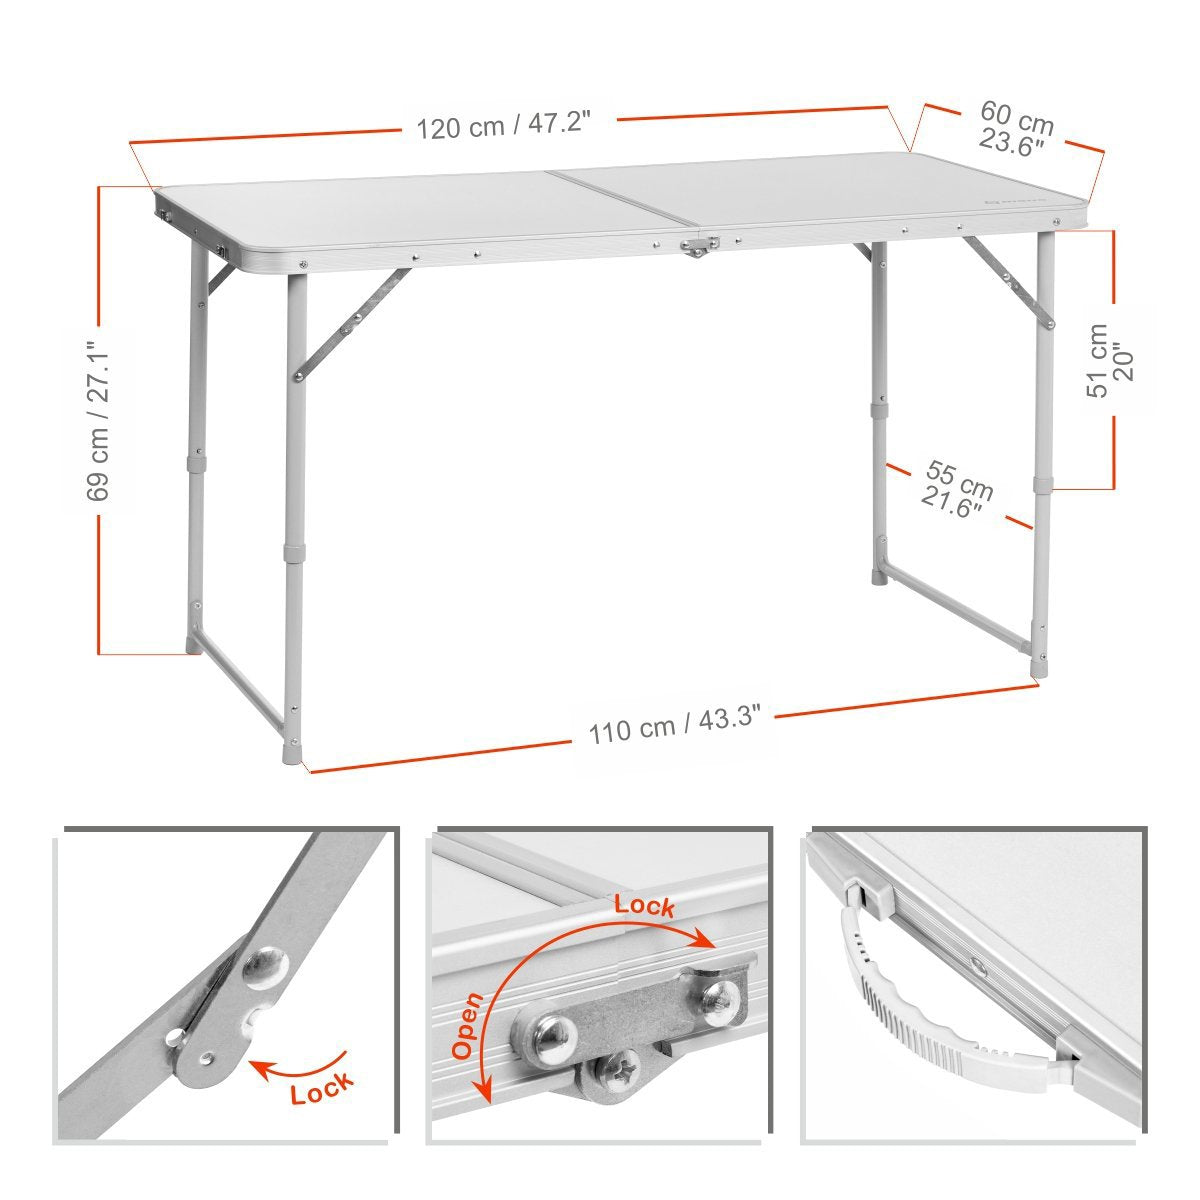 Big Lightweight Folding Aluminum Camping Table is 43.3 inches long, 21.6 inches wide and 27.1 inches high. The table top is 47.2*23.6